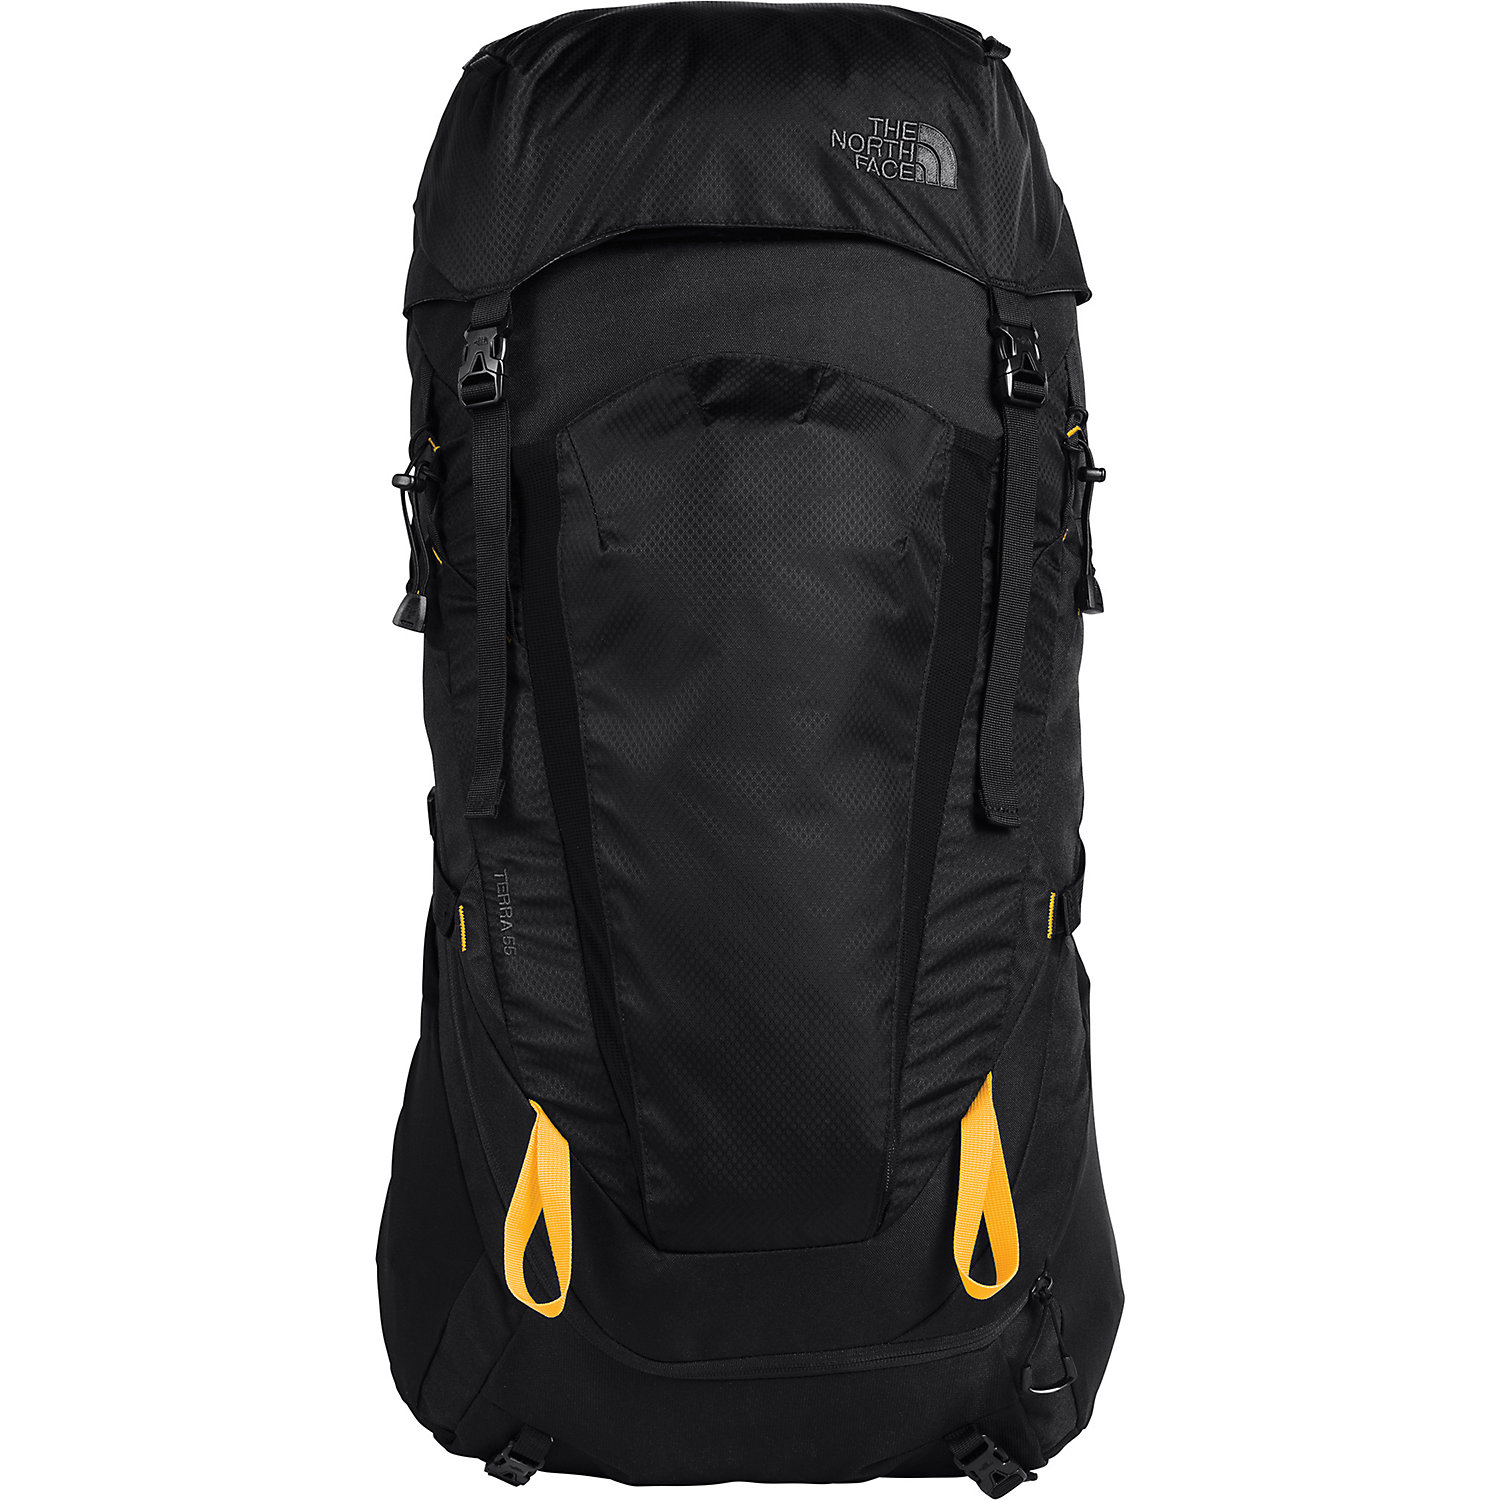 The North Face Terra 40 Pack